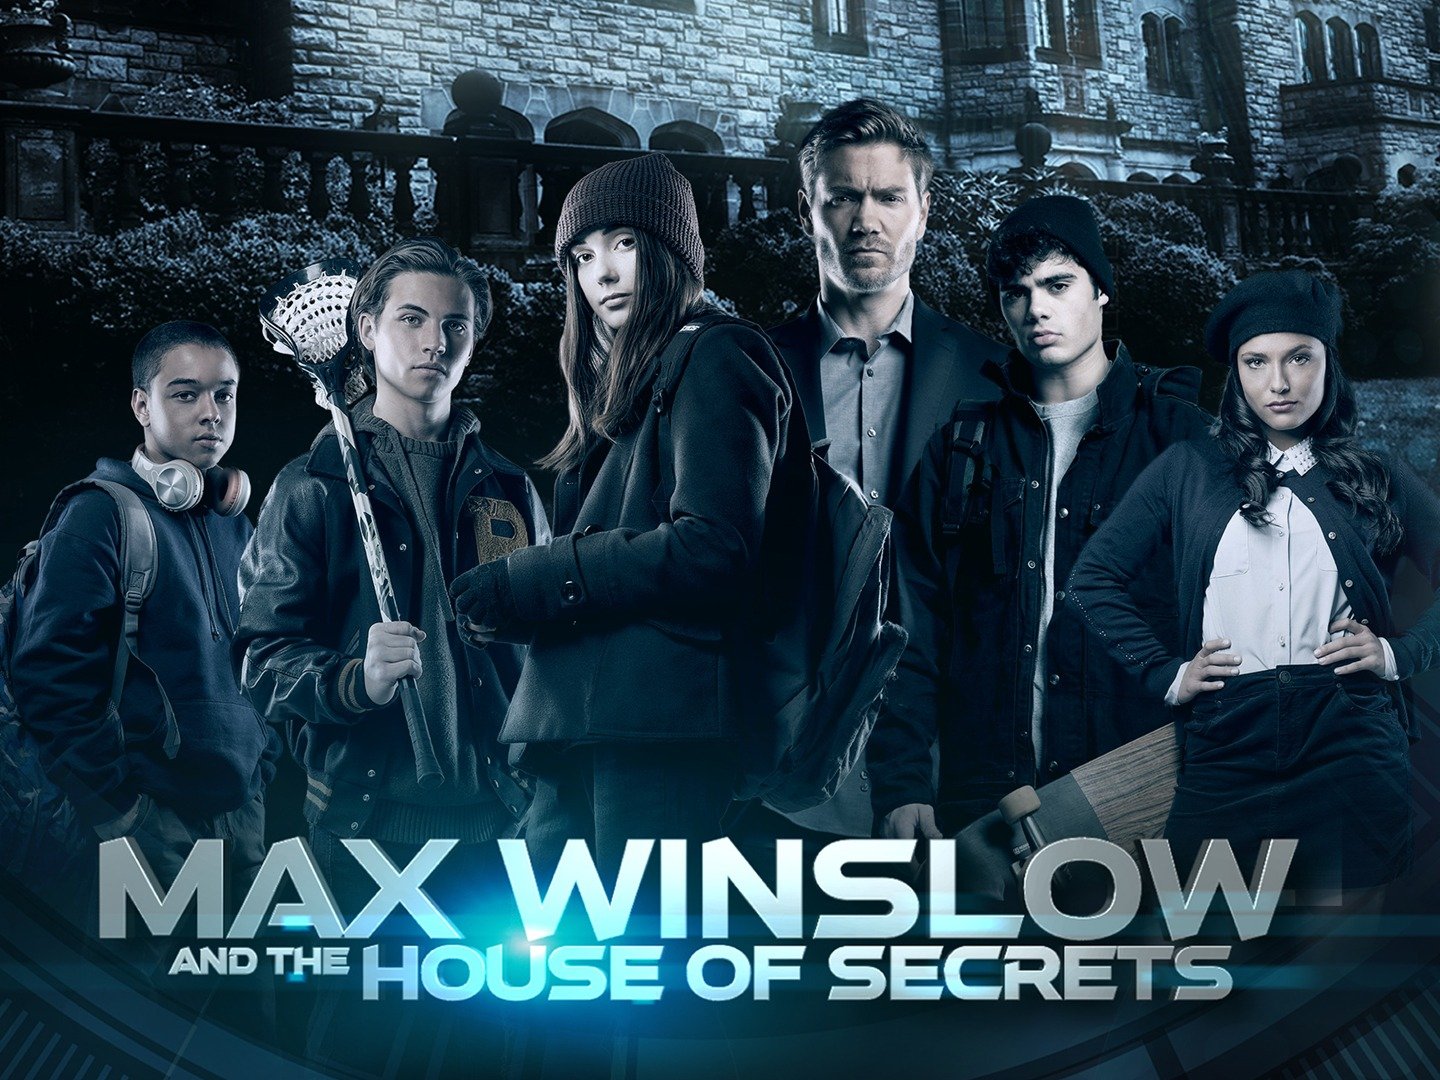 Max Winslow and the House of Secrets: Featurette - Trailers & Videos ...